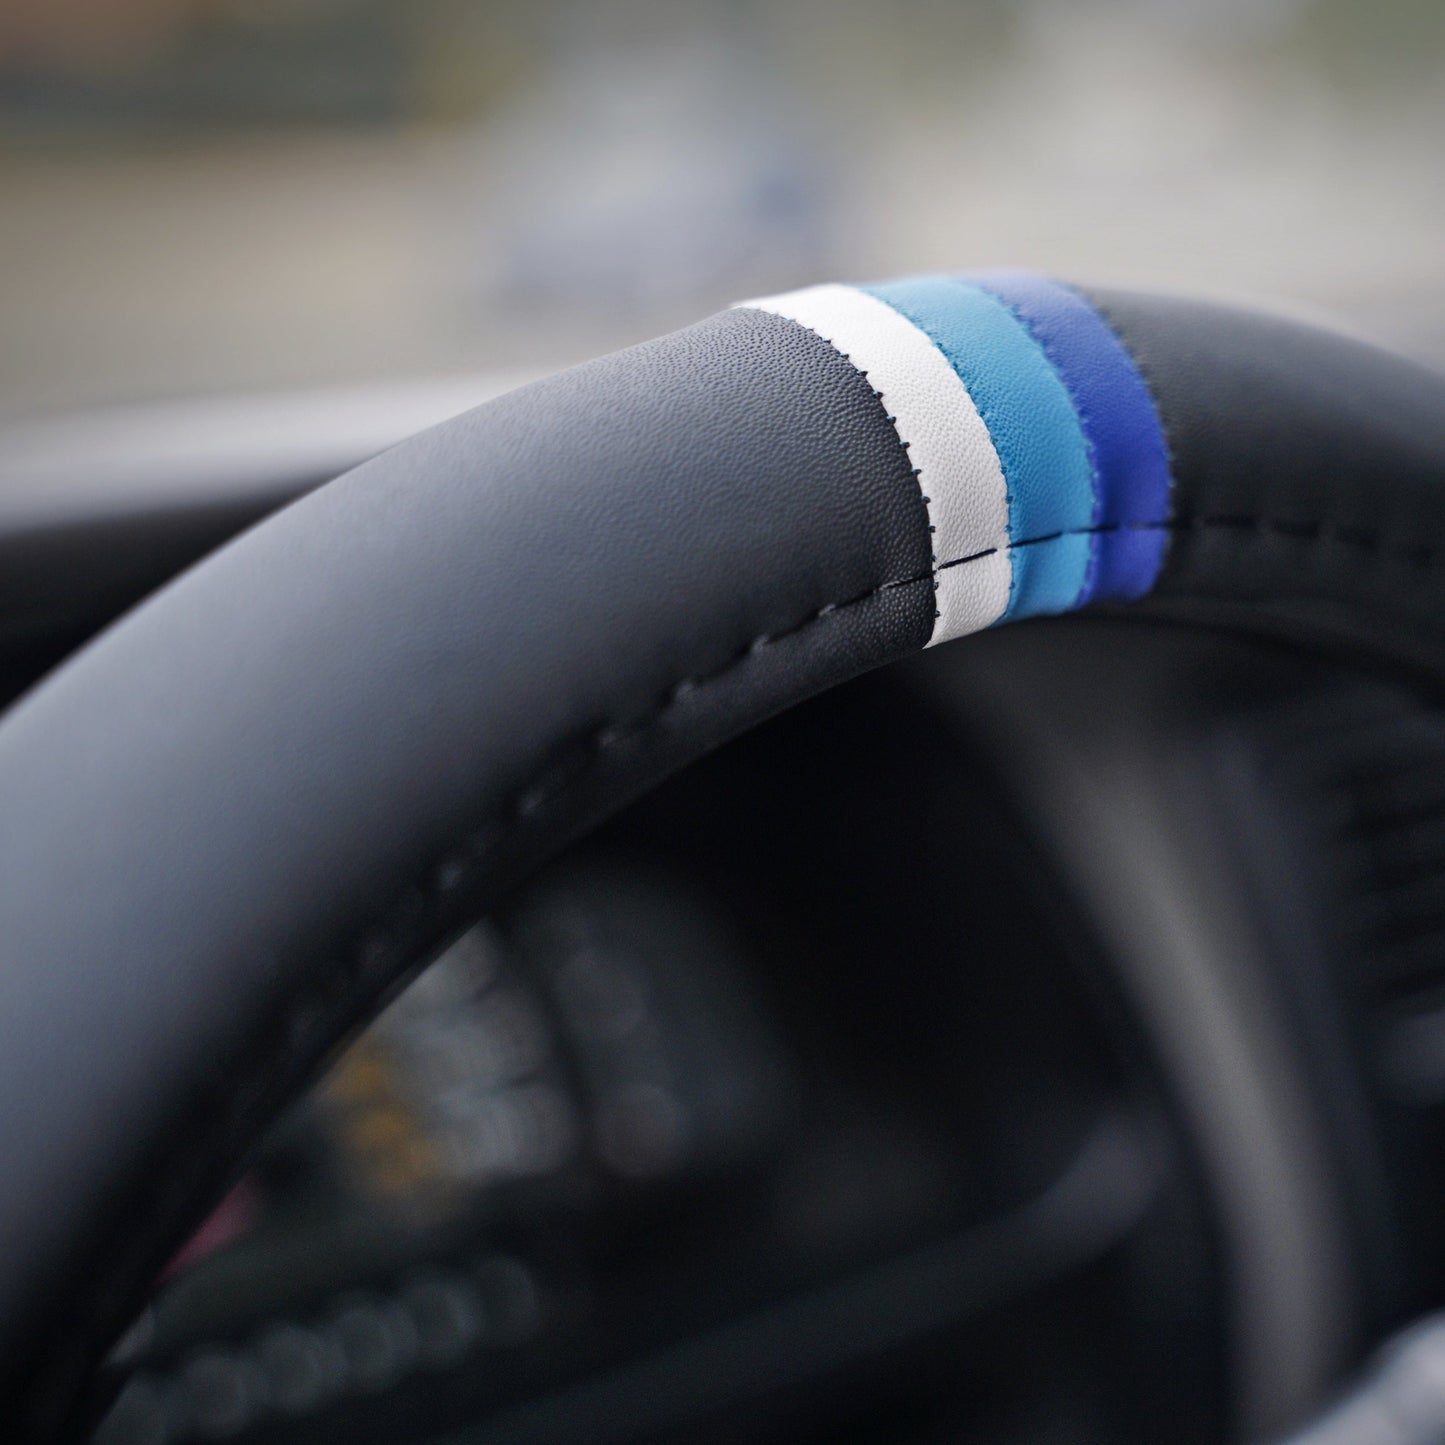 Blue Retro Stripes Steering Wheel Cover for Toyota, 15 1/2 Inch, Leather